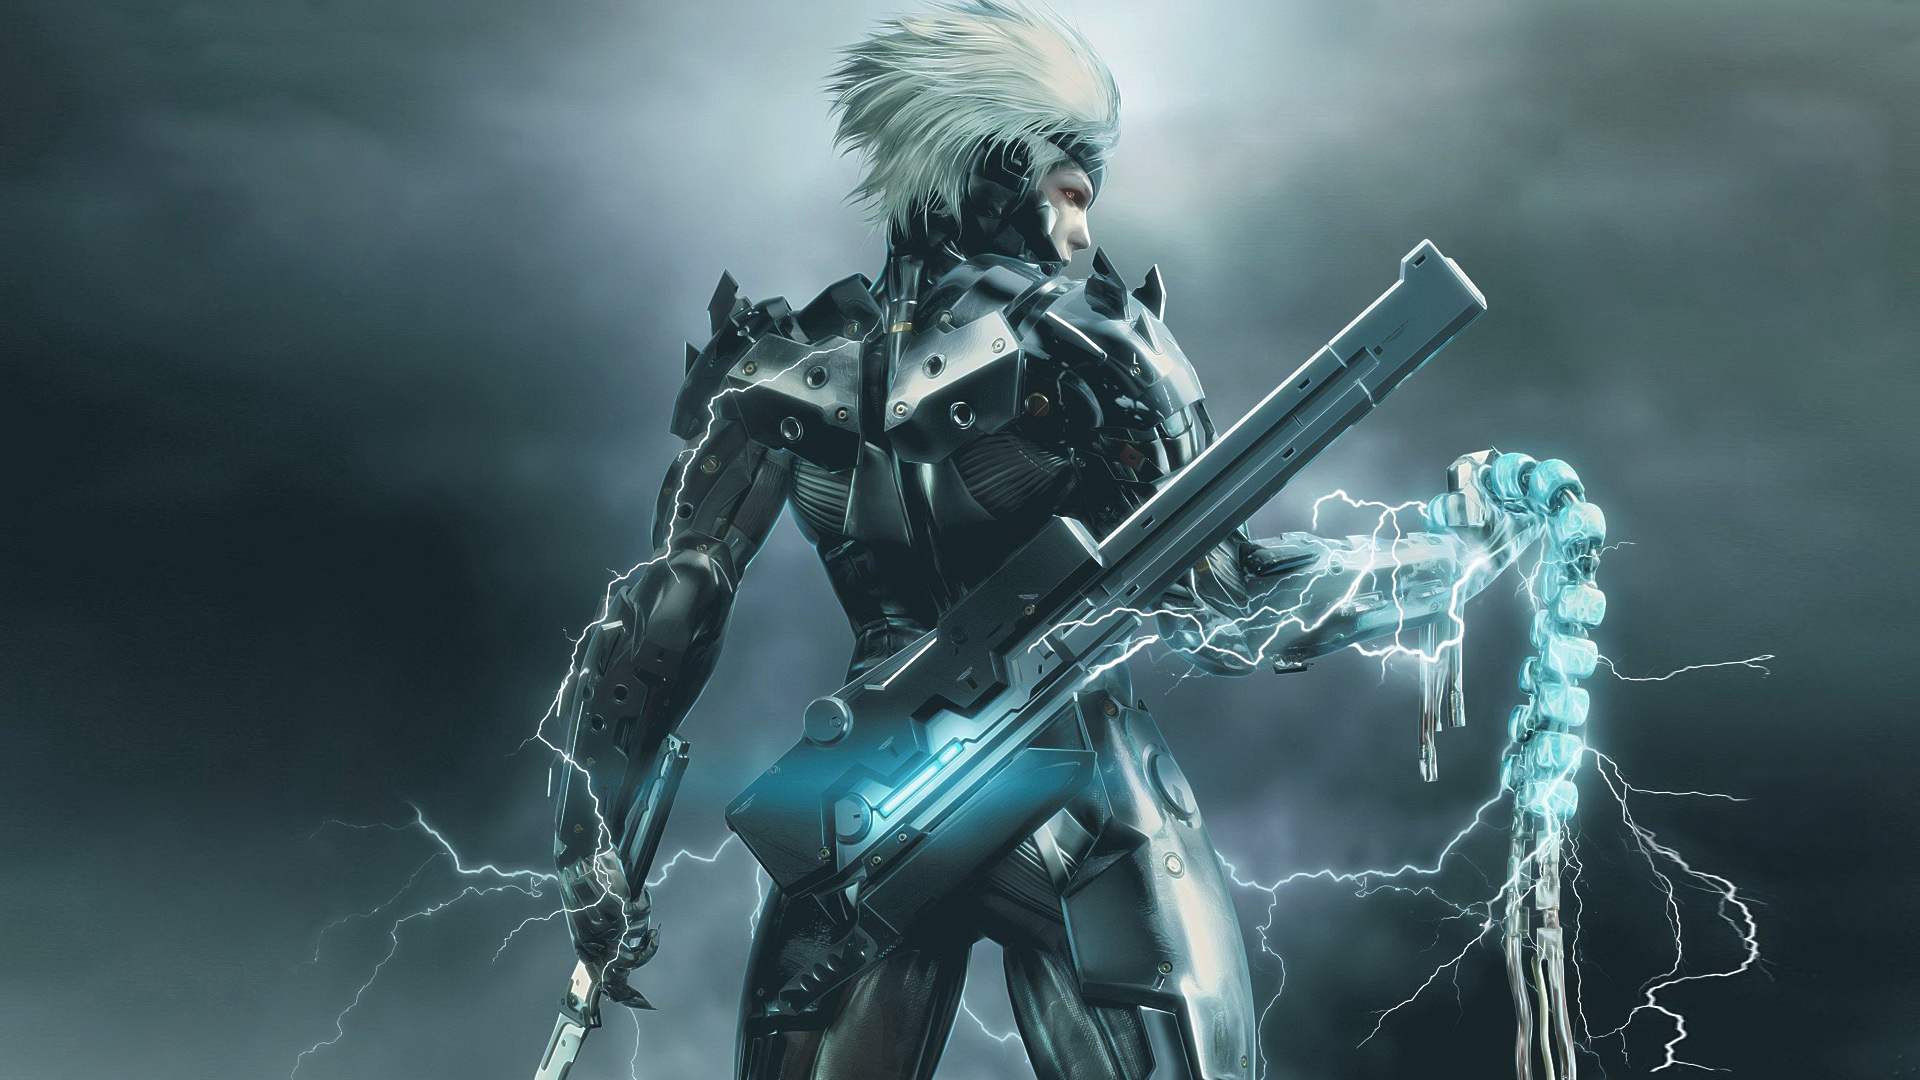 Raiden Wallpaper, HD Raiden Wallpaper. Raiden Best Pics Collection